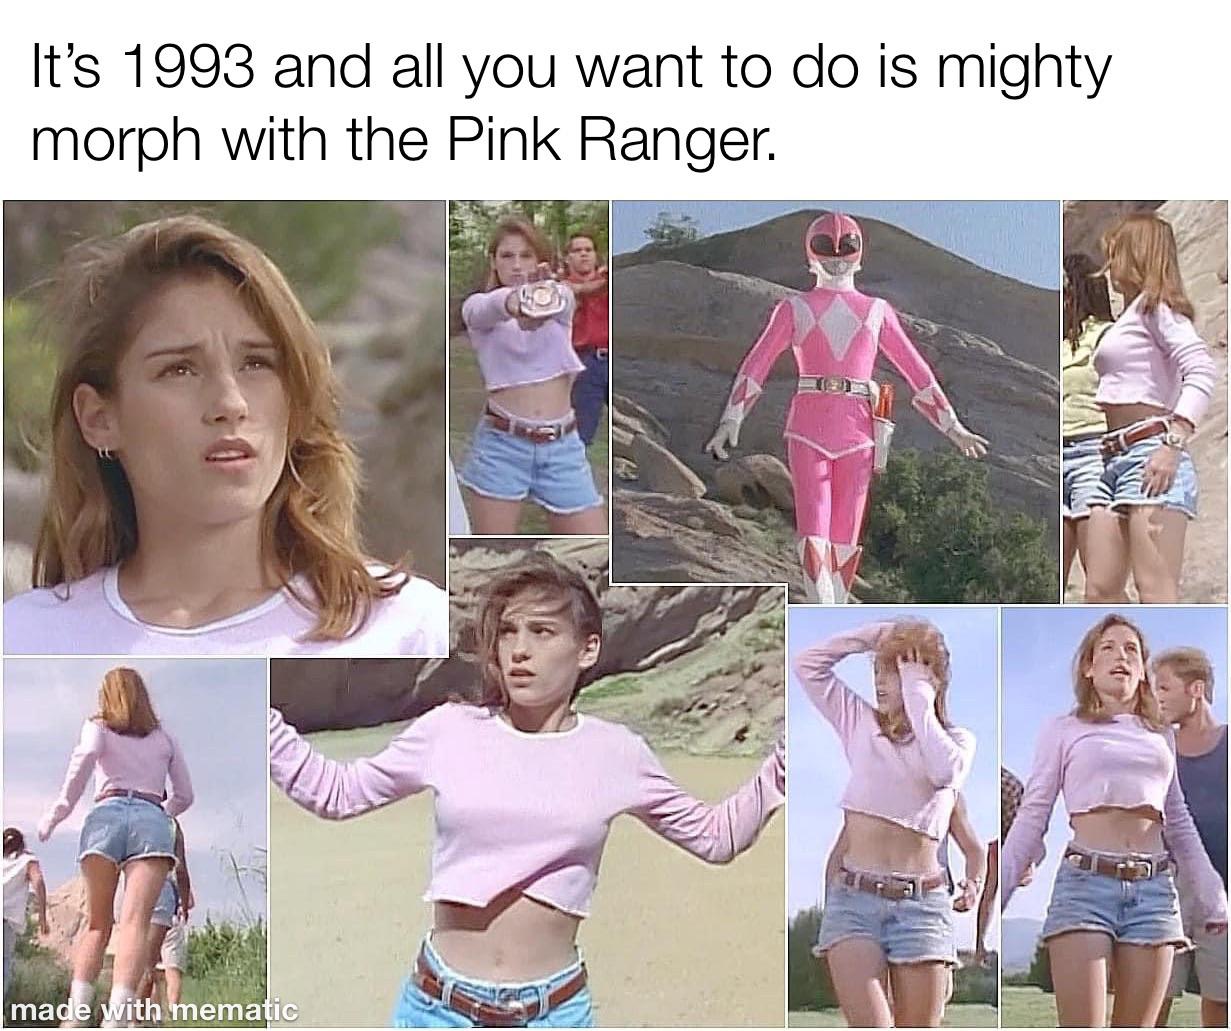 funny memes and pics - Meme - It's 1993 and all you want to do is mighty morph with the Pink Ranger. made with mematic